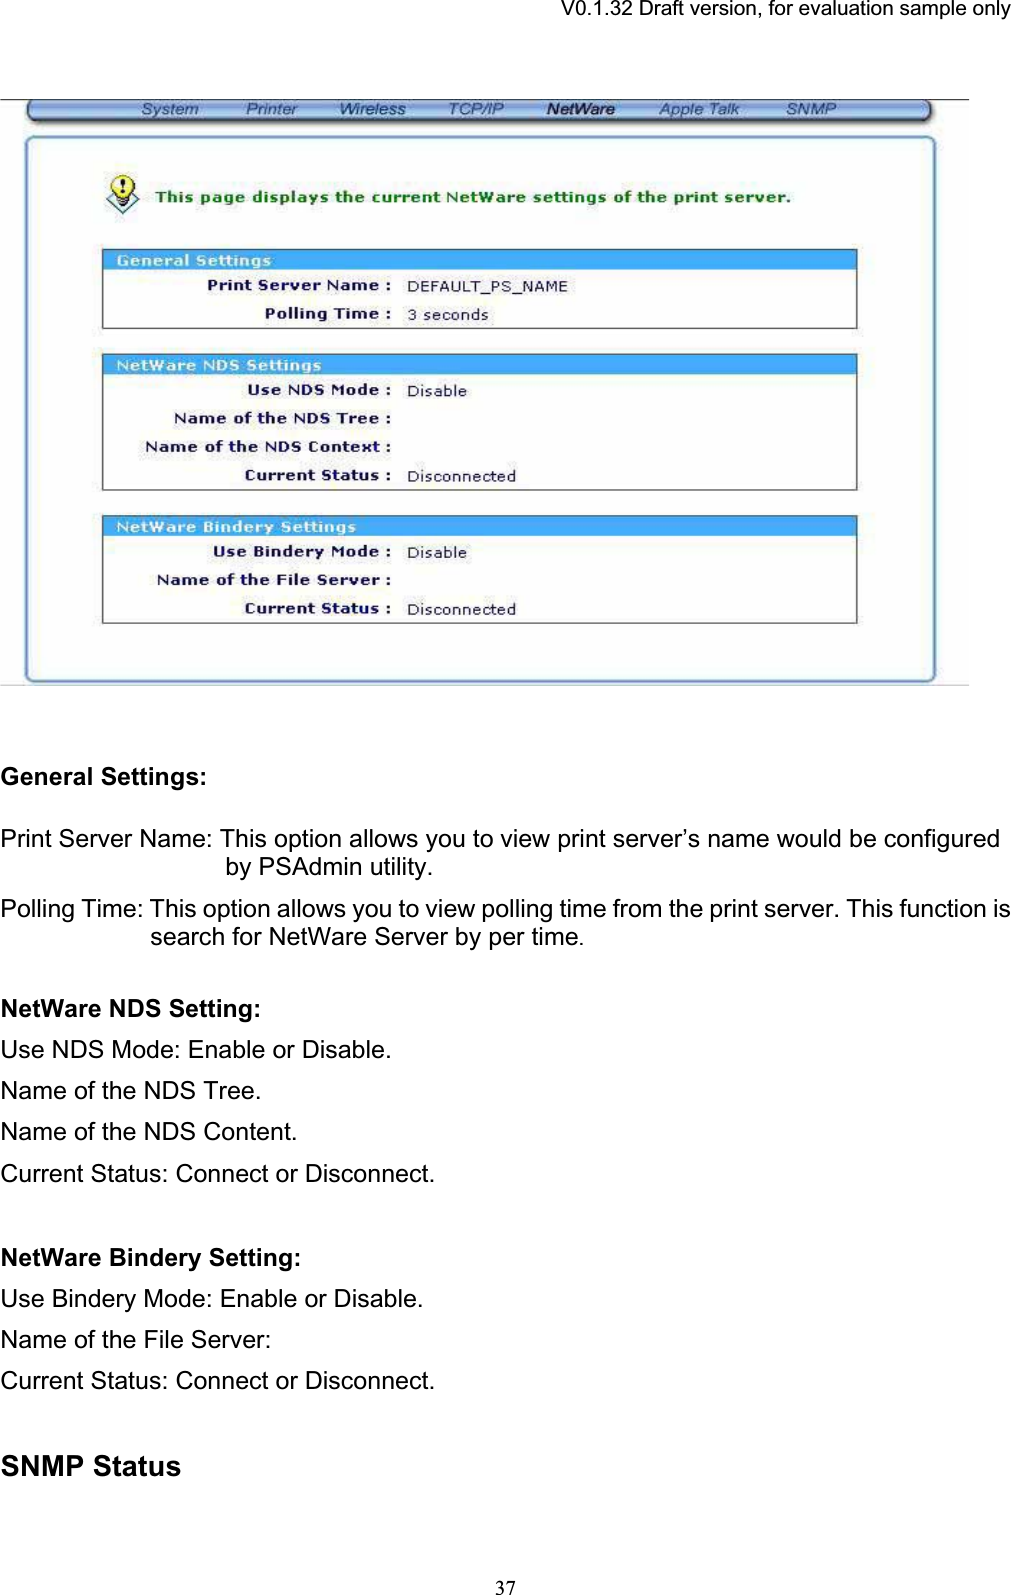 V0.1.32 Draft version, for evaluation sample onlyGeneral Settings: Print Server Name: This option allows you to view print server’s name would be configured by PSAdmin utility. Polling Time: This option allows you to view polling time from the print server. This function is search for NetWare Server by per time.NetWare NDS Setting: Use NDS Mode: Enable or Disable. Name of the NDS Tree. Name of the NDS Content. Current Status: Connect or Disconnect.NetWare Bindery Setting: Use Bindery Mode: Enable or Disable. Name of the File Server: Current Status: Connect or Disconnect.SNMP Status 37